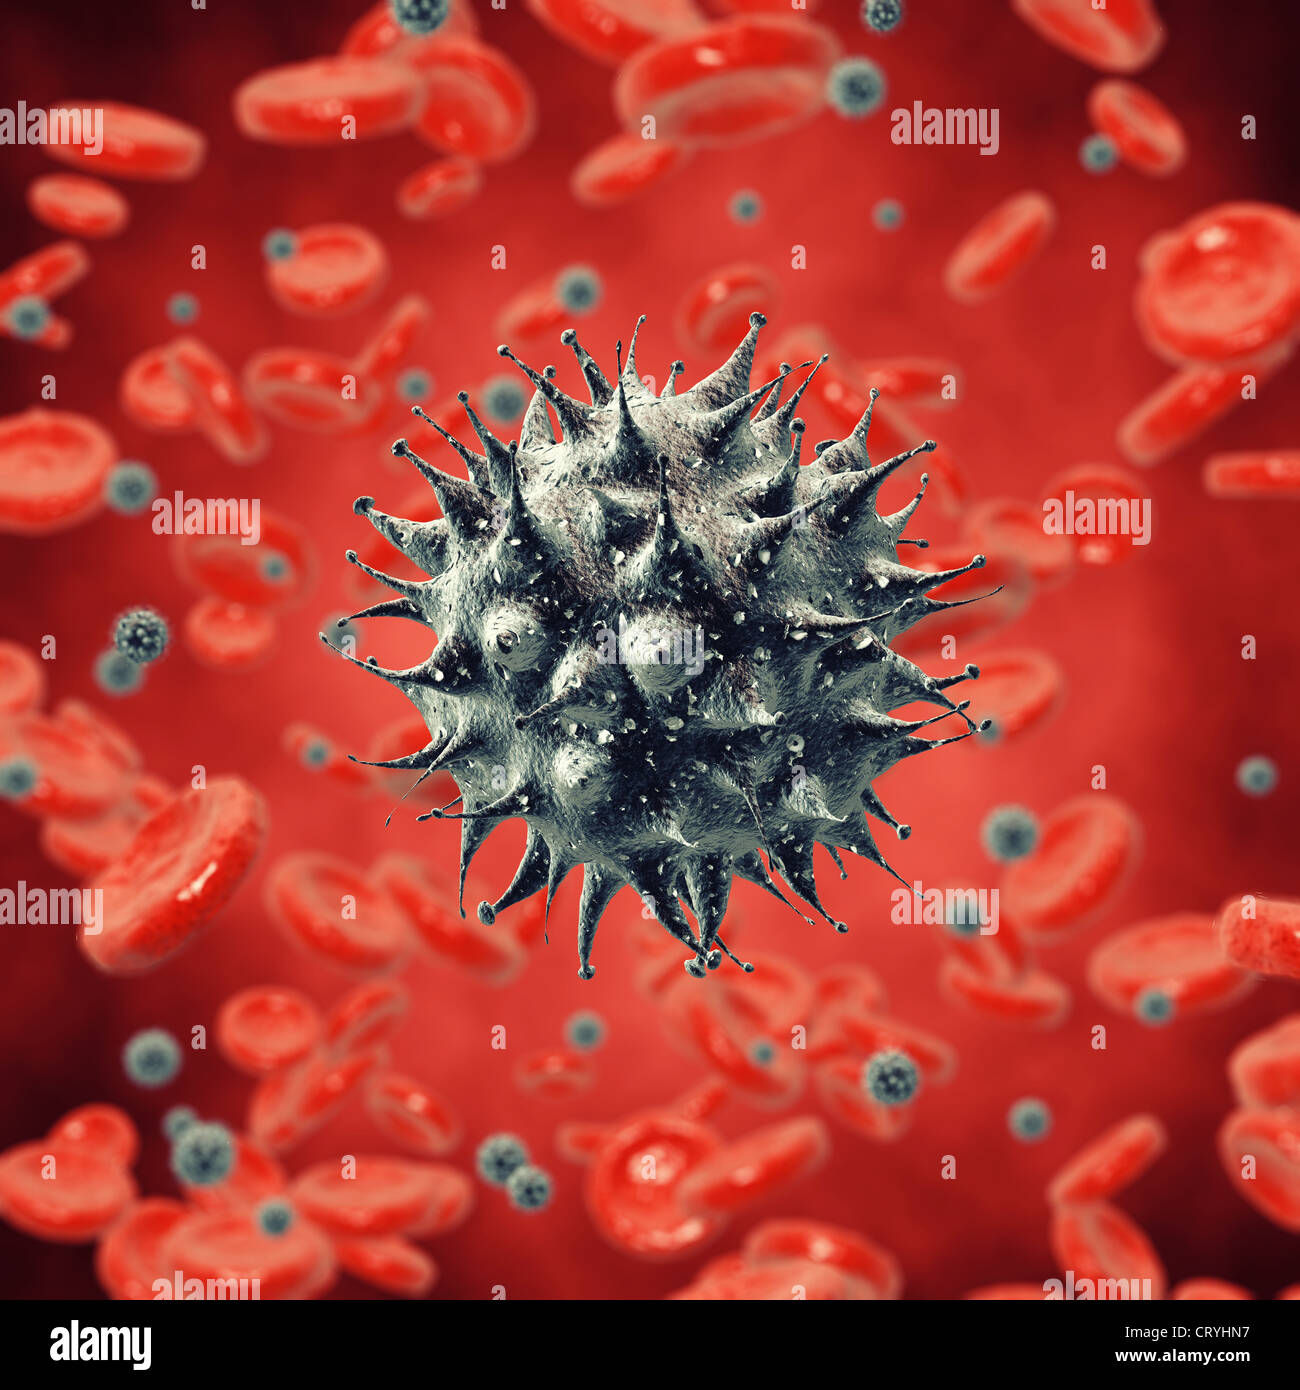 Viruses and red blood cells , contaminated blood Stock Photo